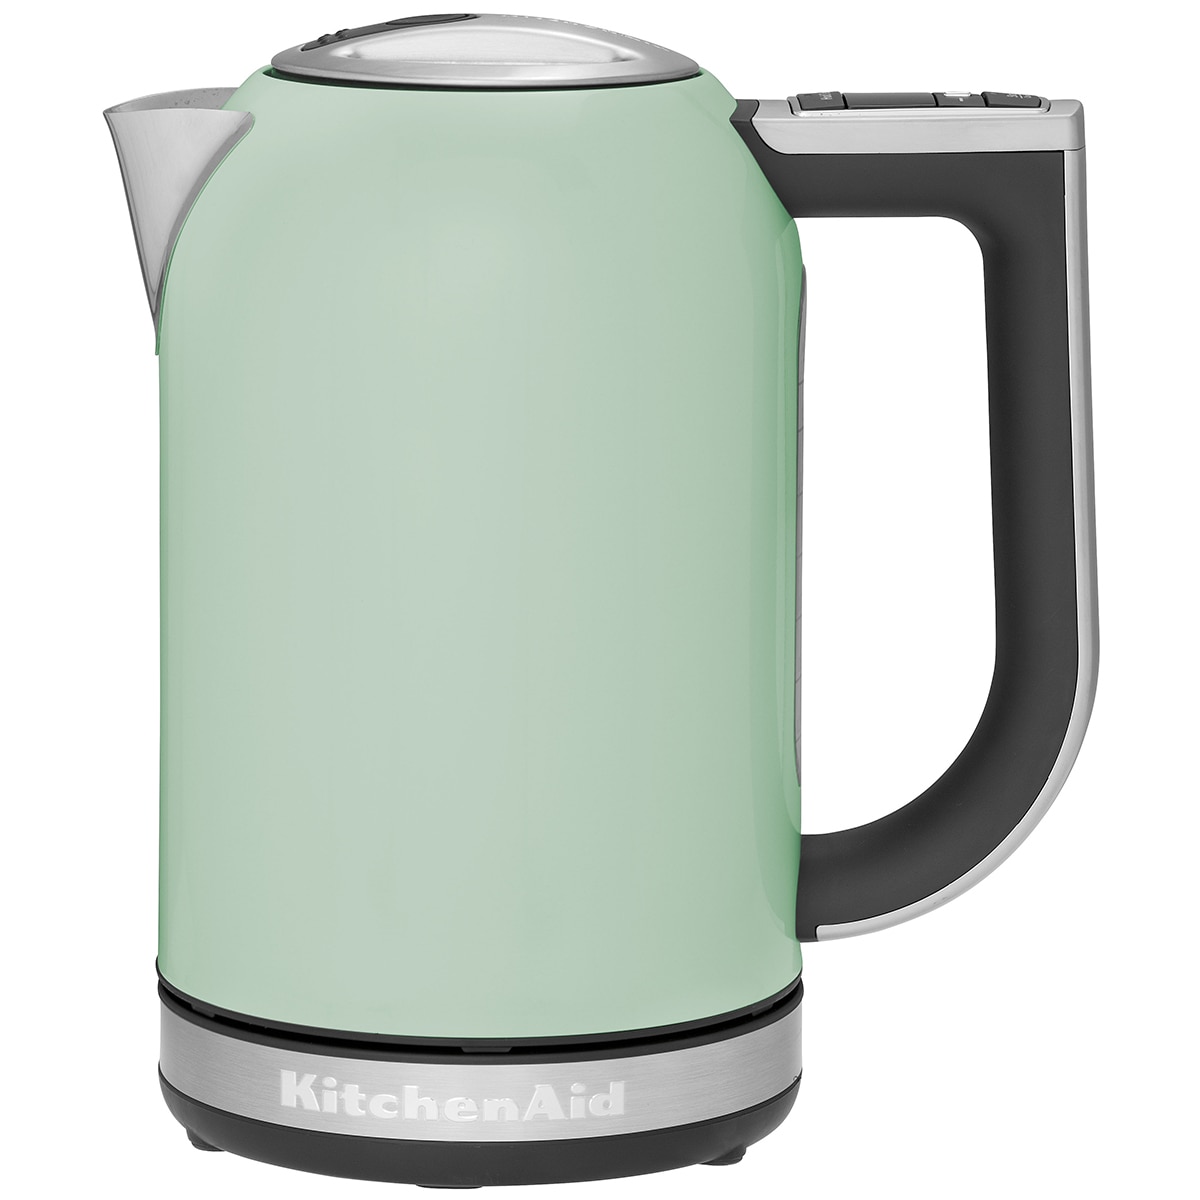 Kitchenaid 1 7l Electric Kettle With Digital Temperature Control